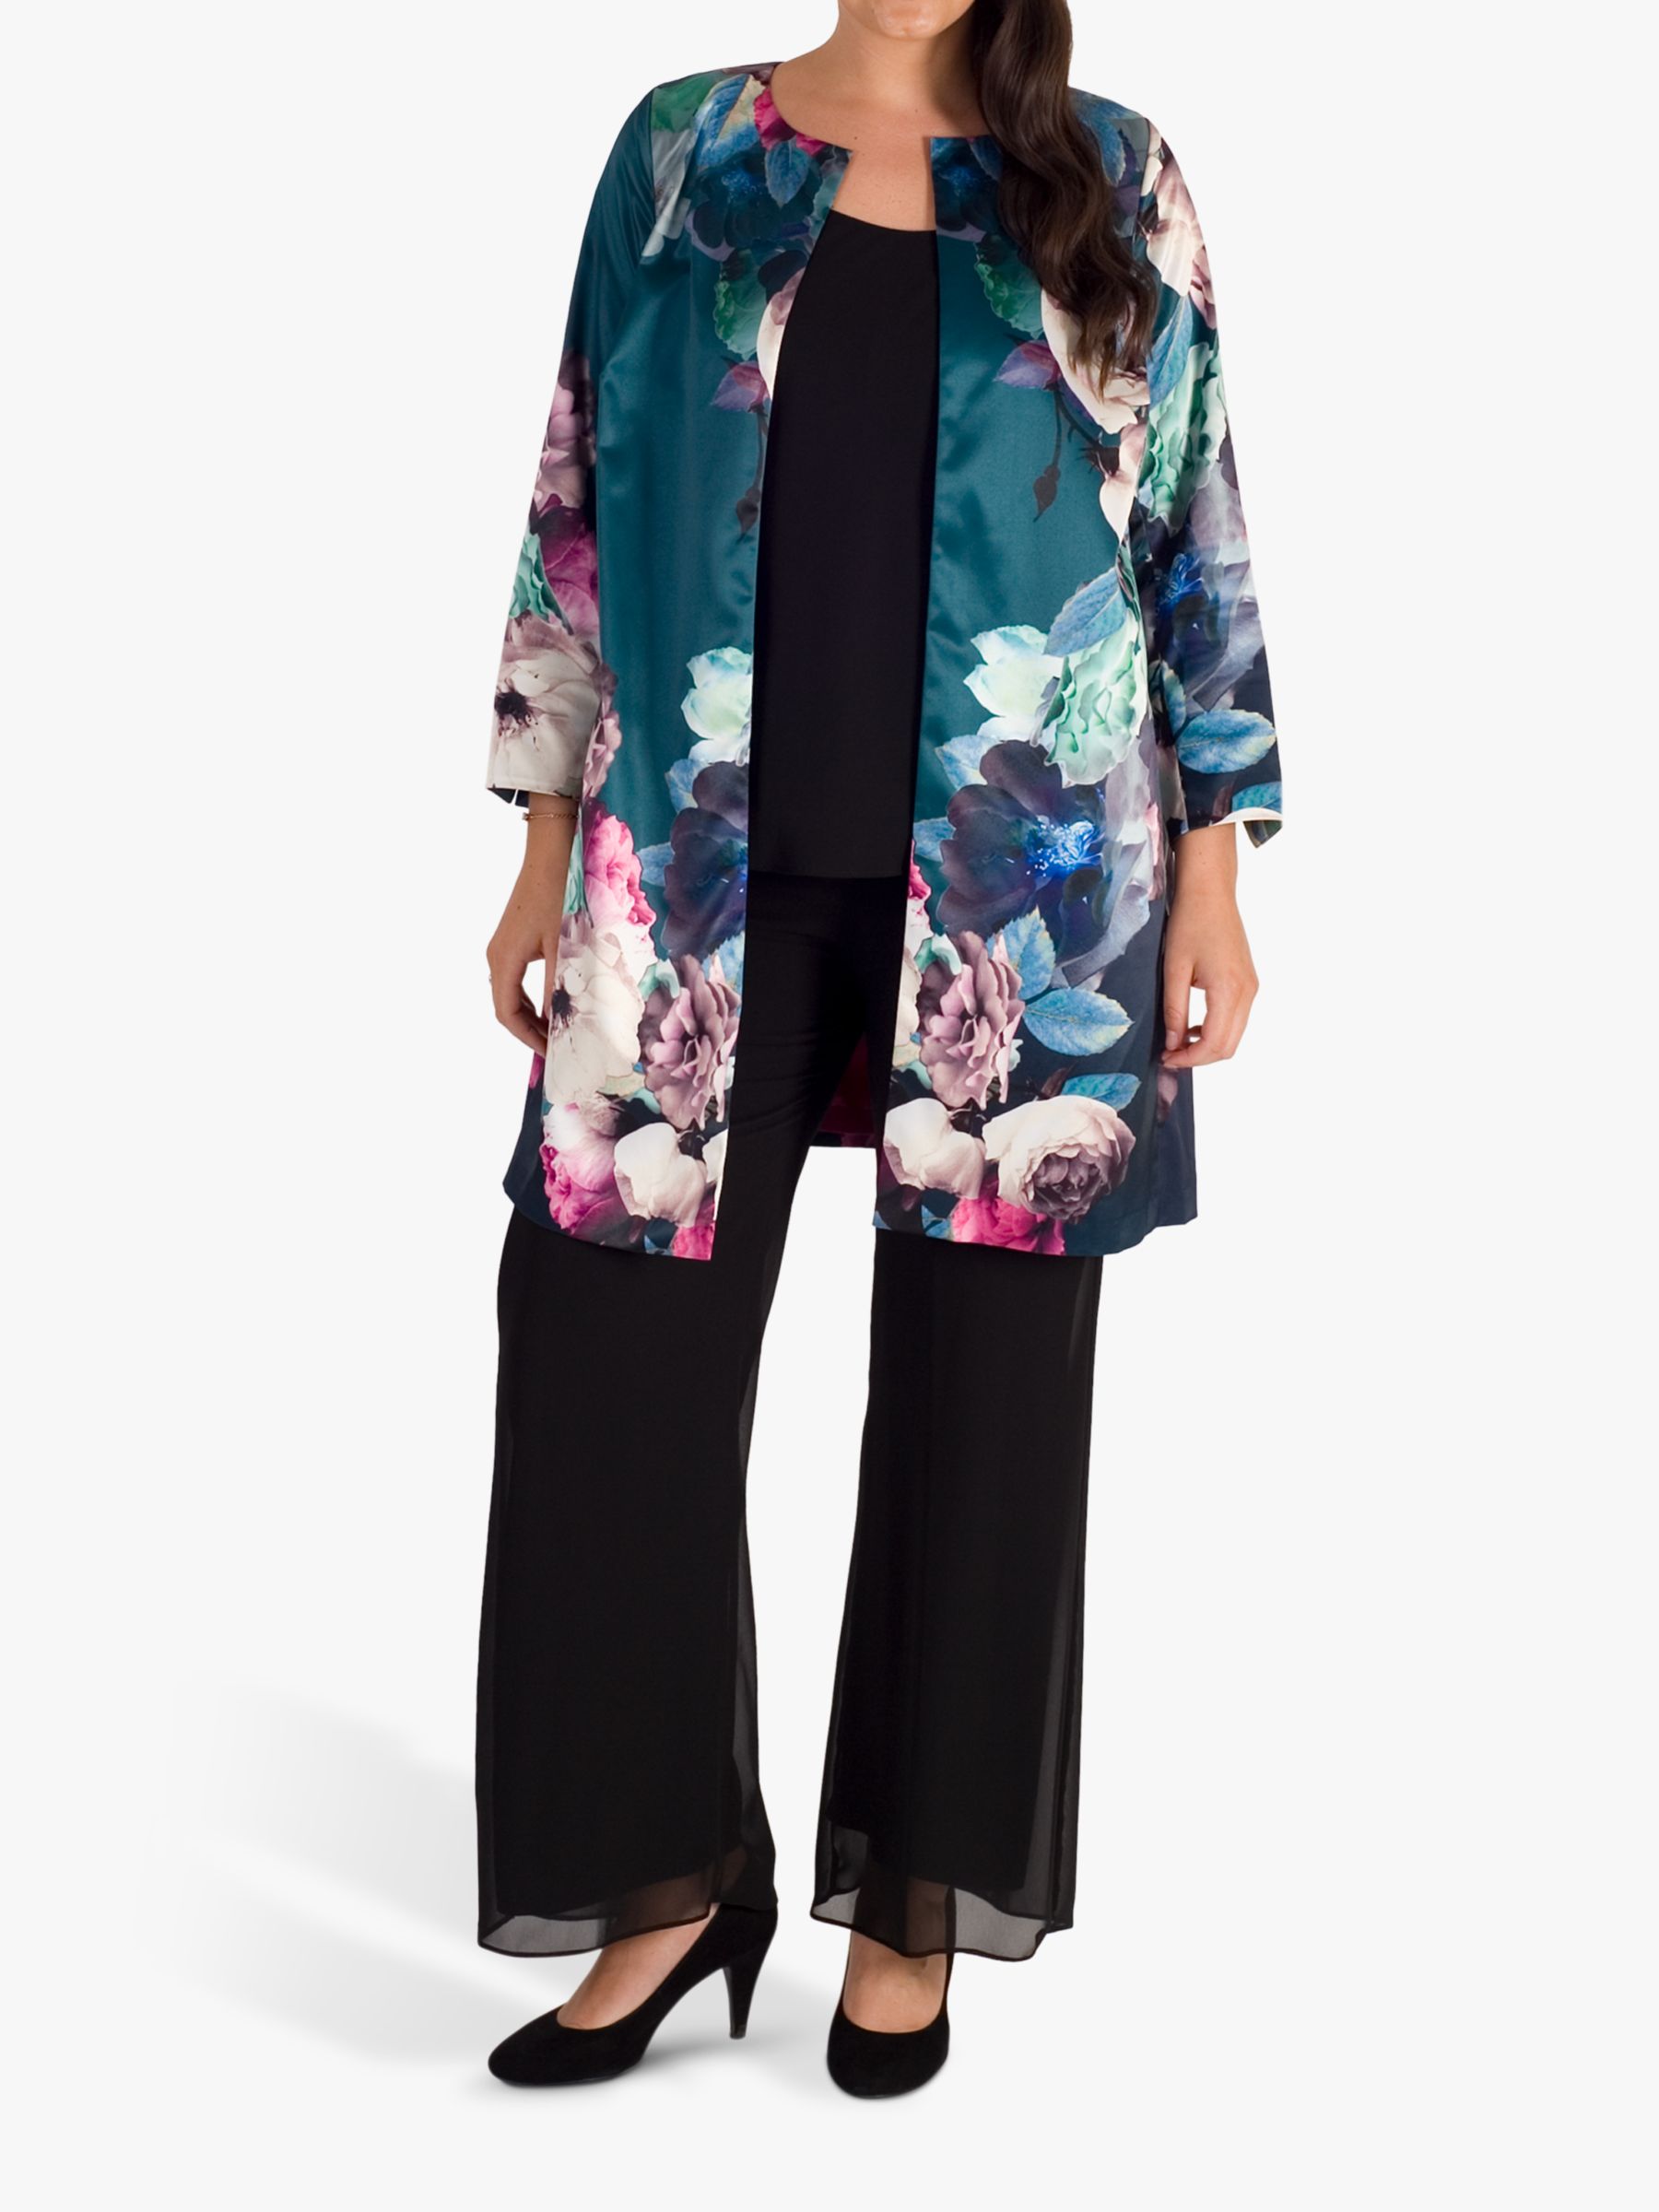 chesca Oversized Floral Jacket, Green/Multi at John Lewis & Partners